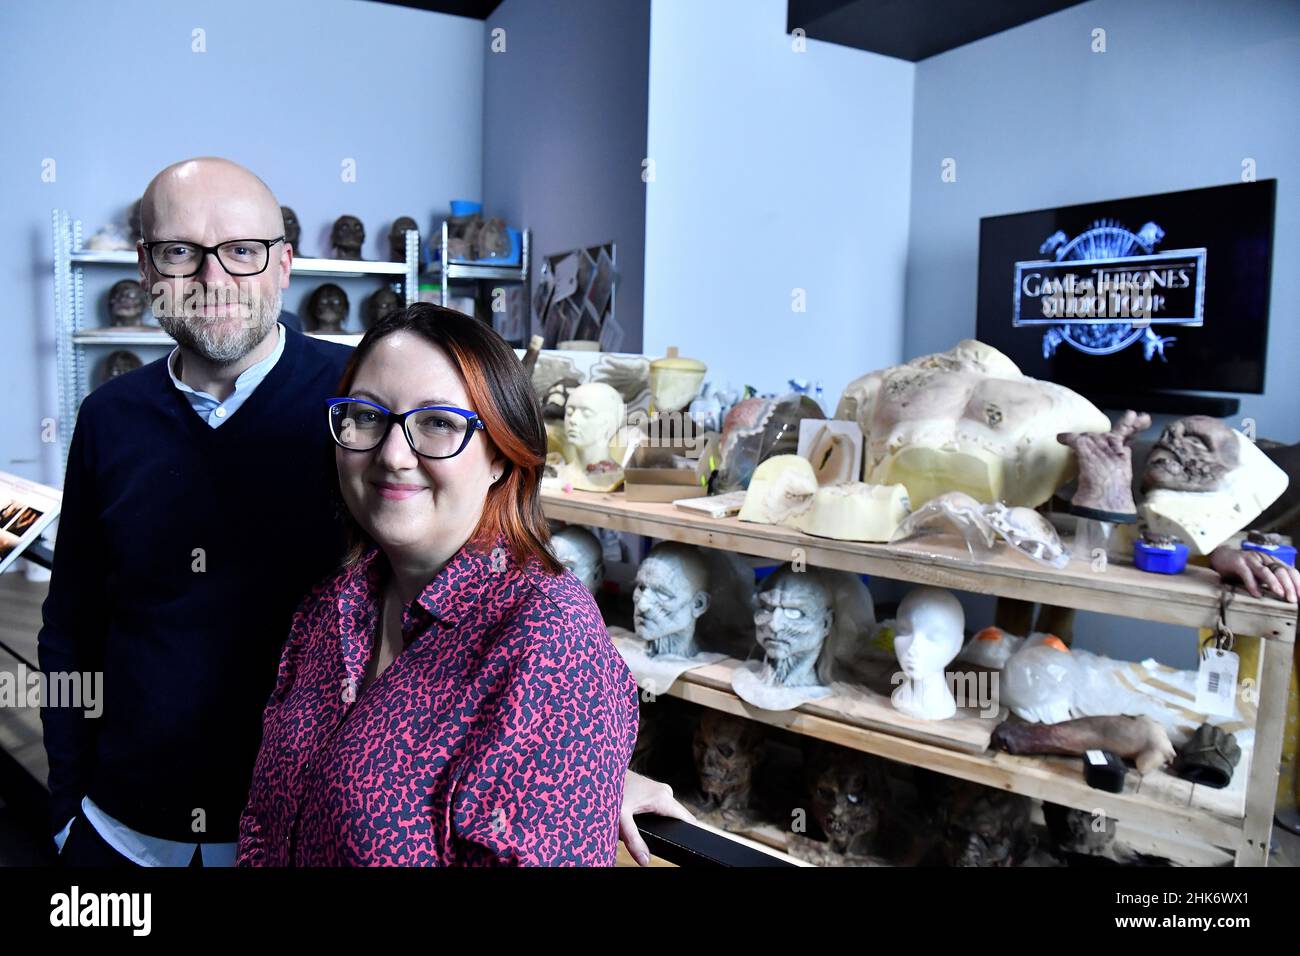 Barrie and Sarah Gower, who worked as prosthetics designers on TV show Game of Thrones, pose for a photograph in the prosthetics room during the media preview day for the opening of the new Game of Thrones studio tour at Linen Mill Studios in Banbridge, Northern Ireland, February 2, 2022. REUTERS/Clodagh Kilcoyne Stock Photo